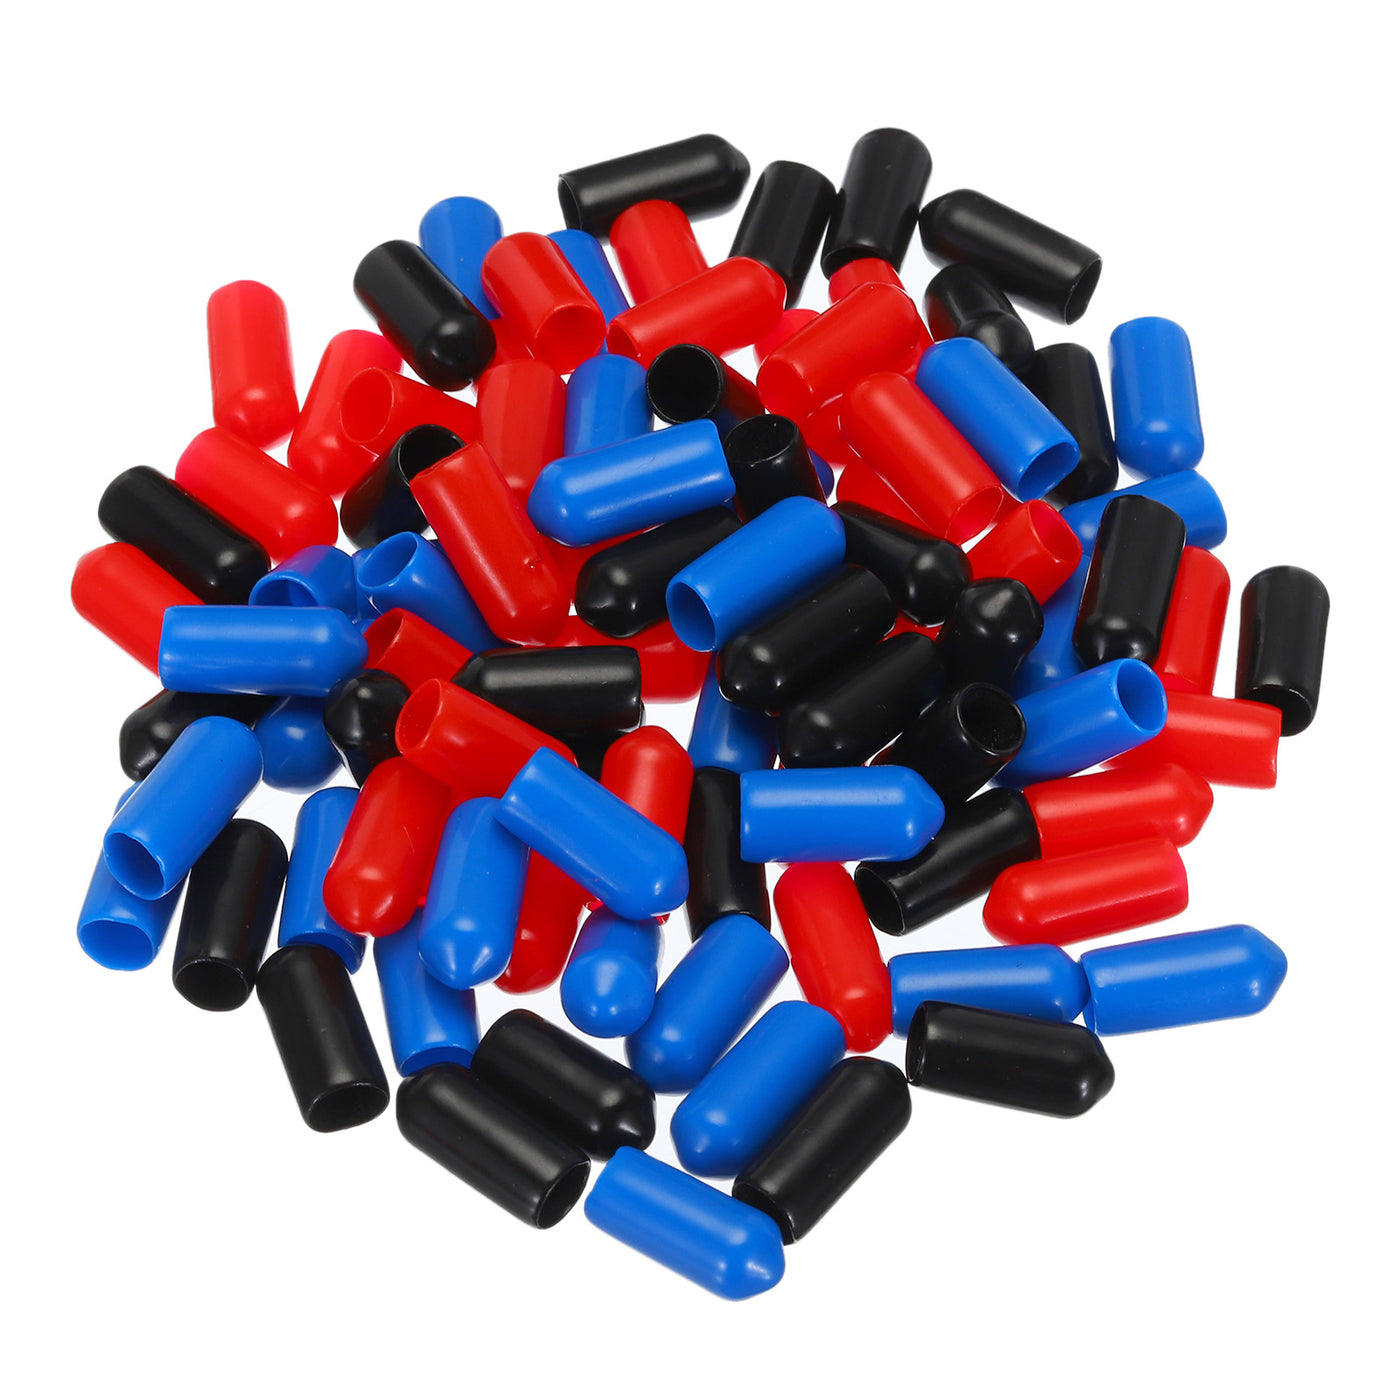 uxcell Uxcell 90pcs Rubber End Caps 7.5mm ID Vinyl PVC Round Tube Bolt Cap Cover Screw Thread Protectors, Black Red Blue